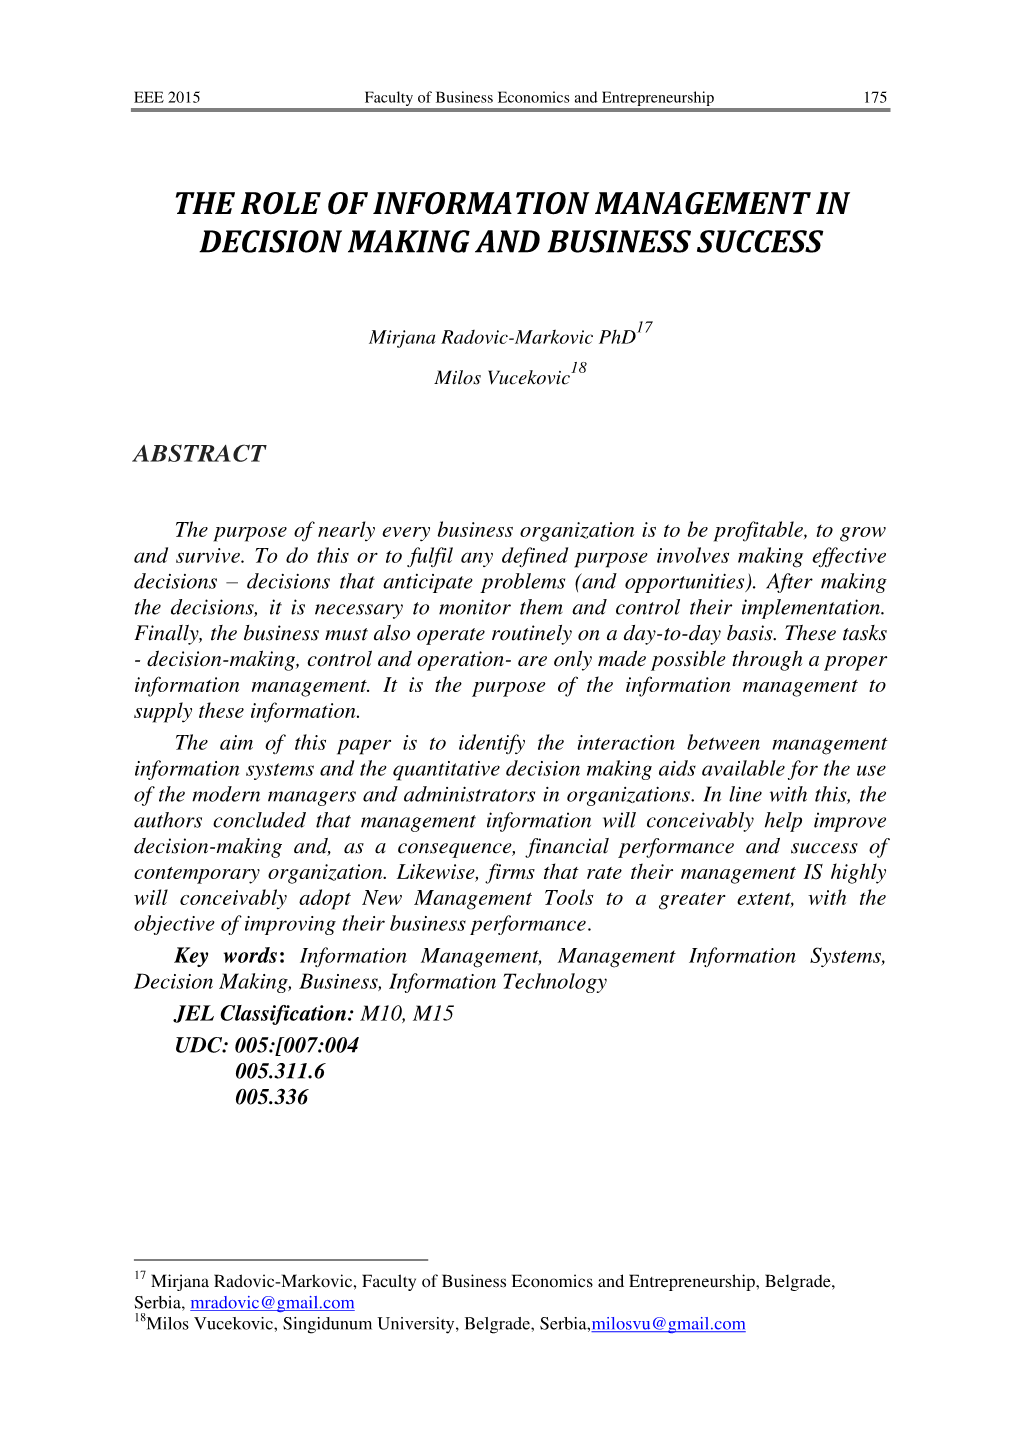 The Role of Information Management in Decision Making and Business Success